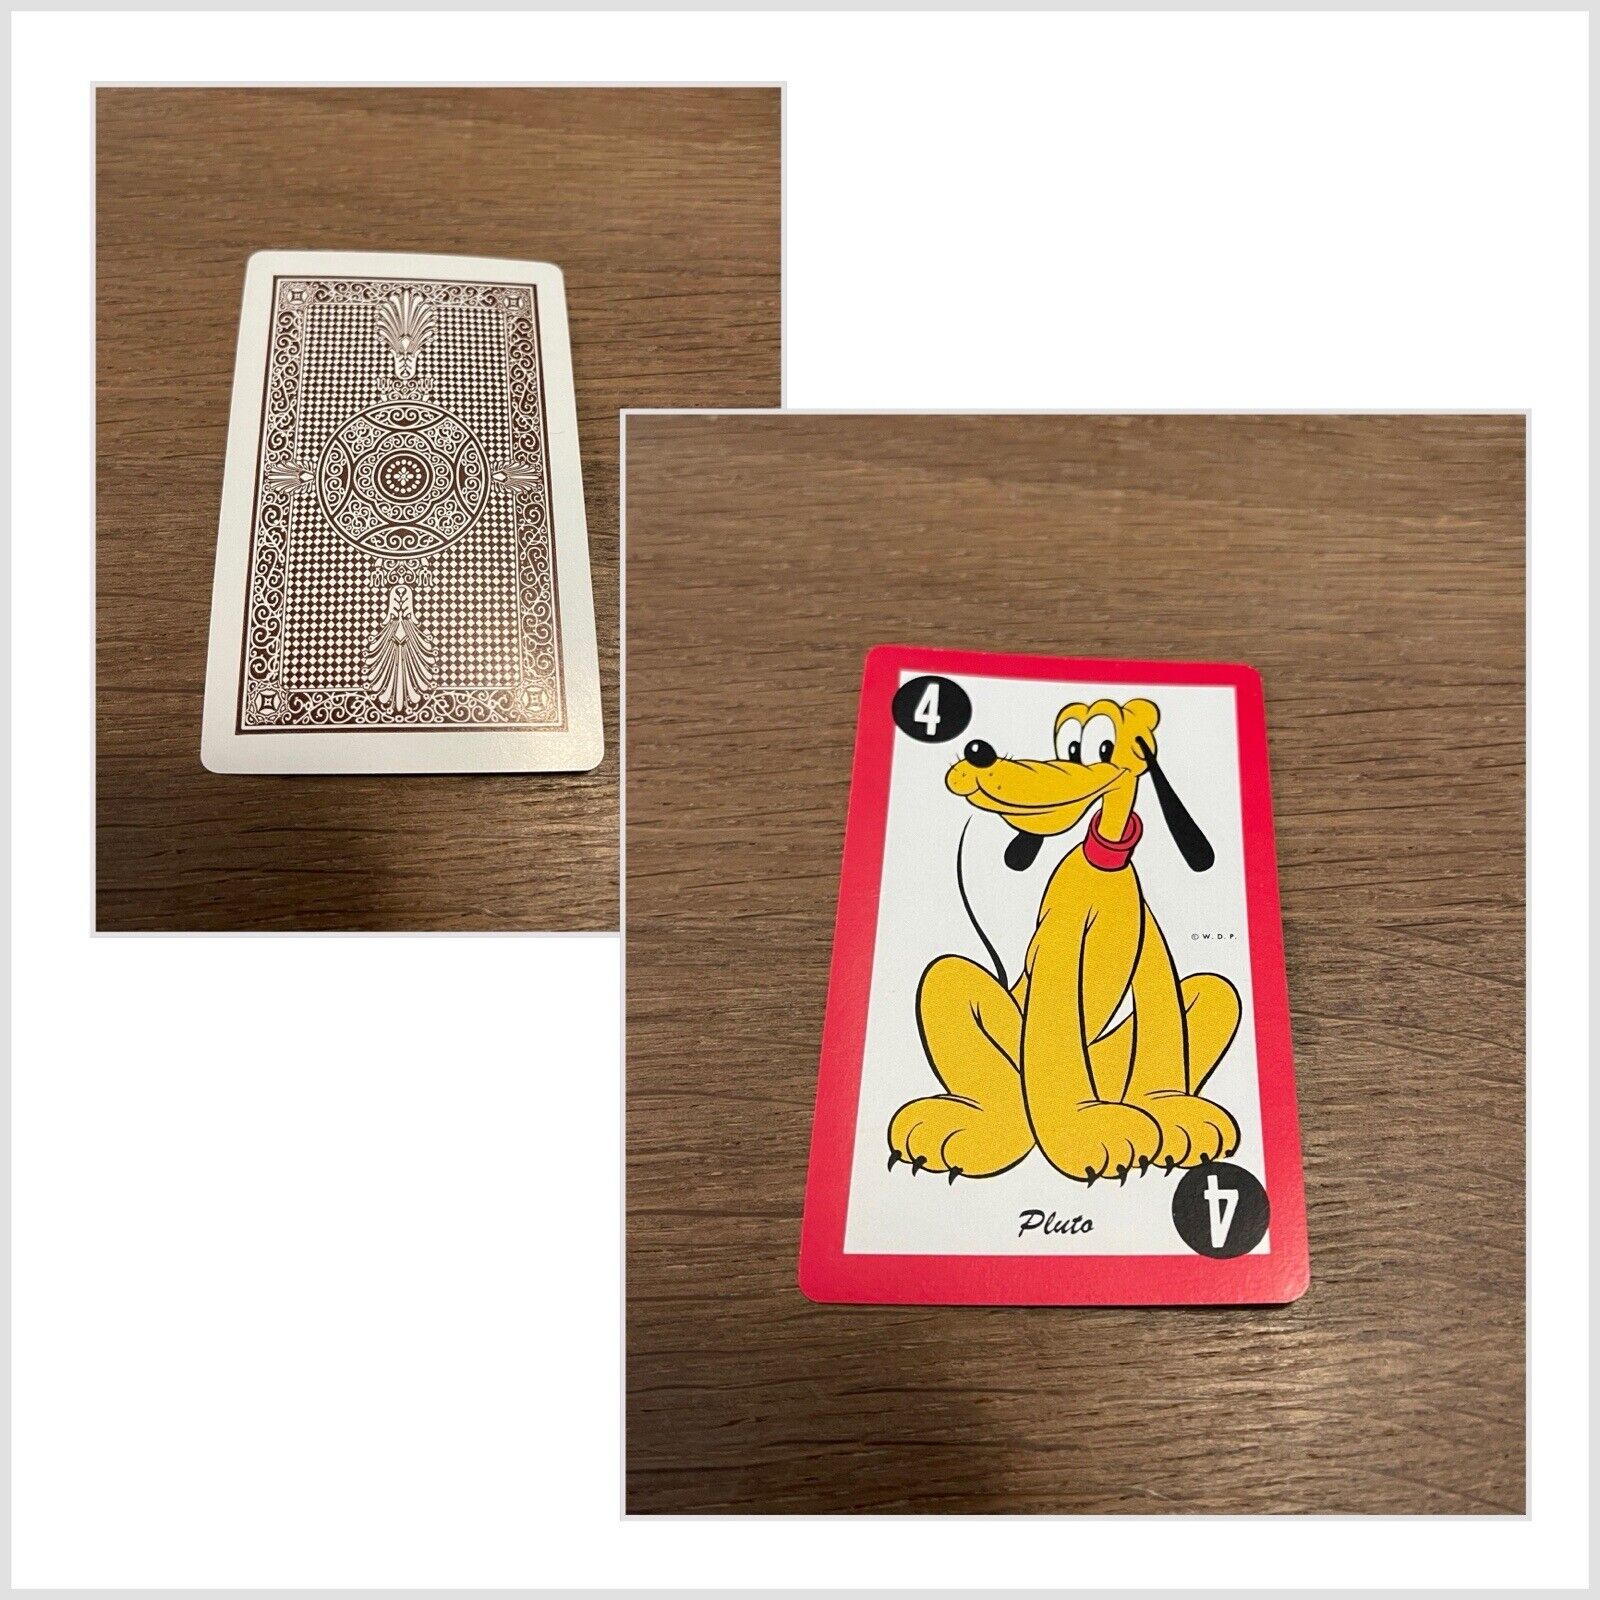 RARE VINTAGE 1949 WHITMAN DISNEY DONALD DUCK PLAYING CARD GAME PLUTO CARD